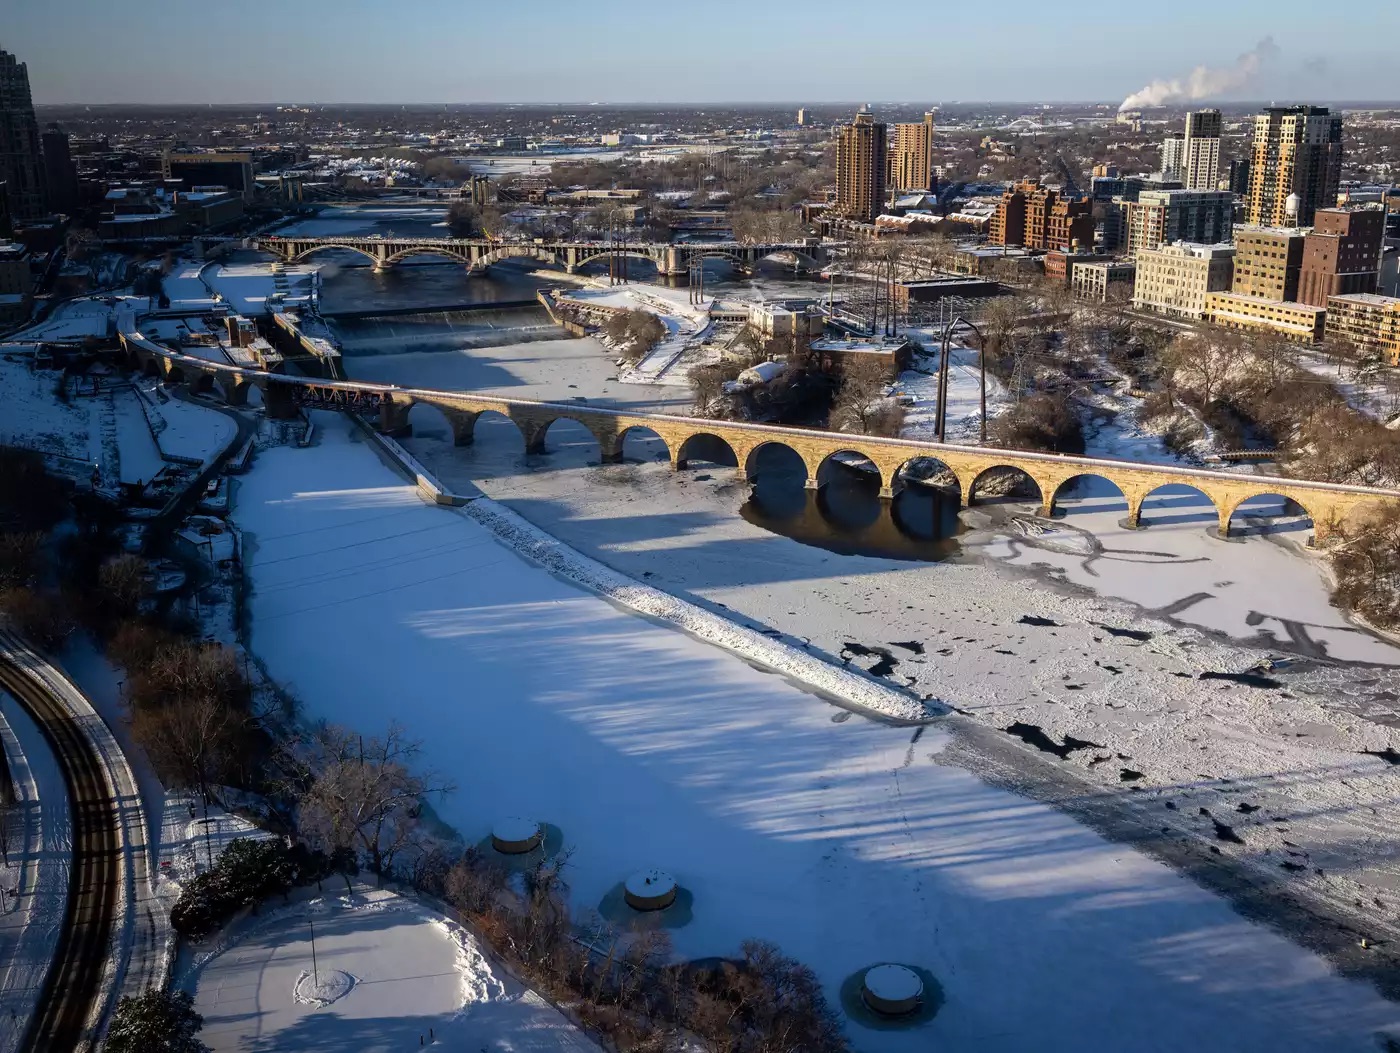 Land next to St. Anthony Falls could return to Dakota tribes